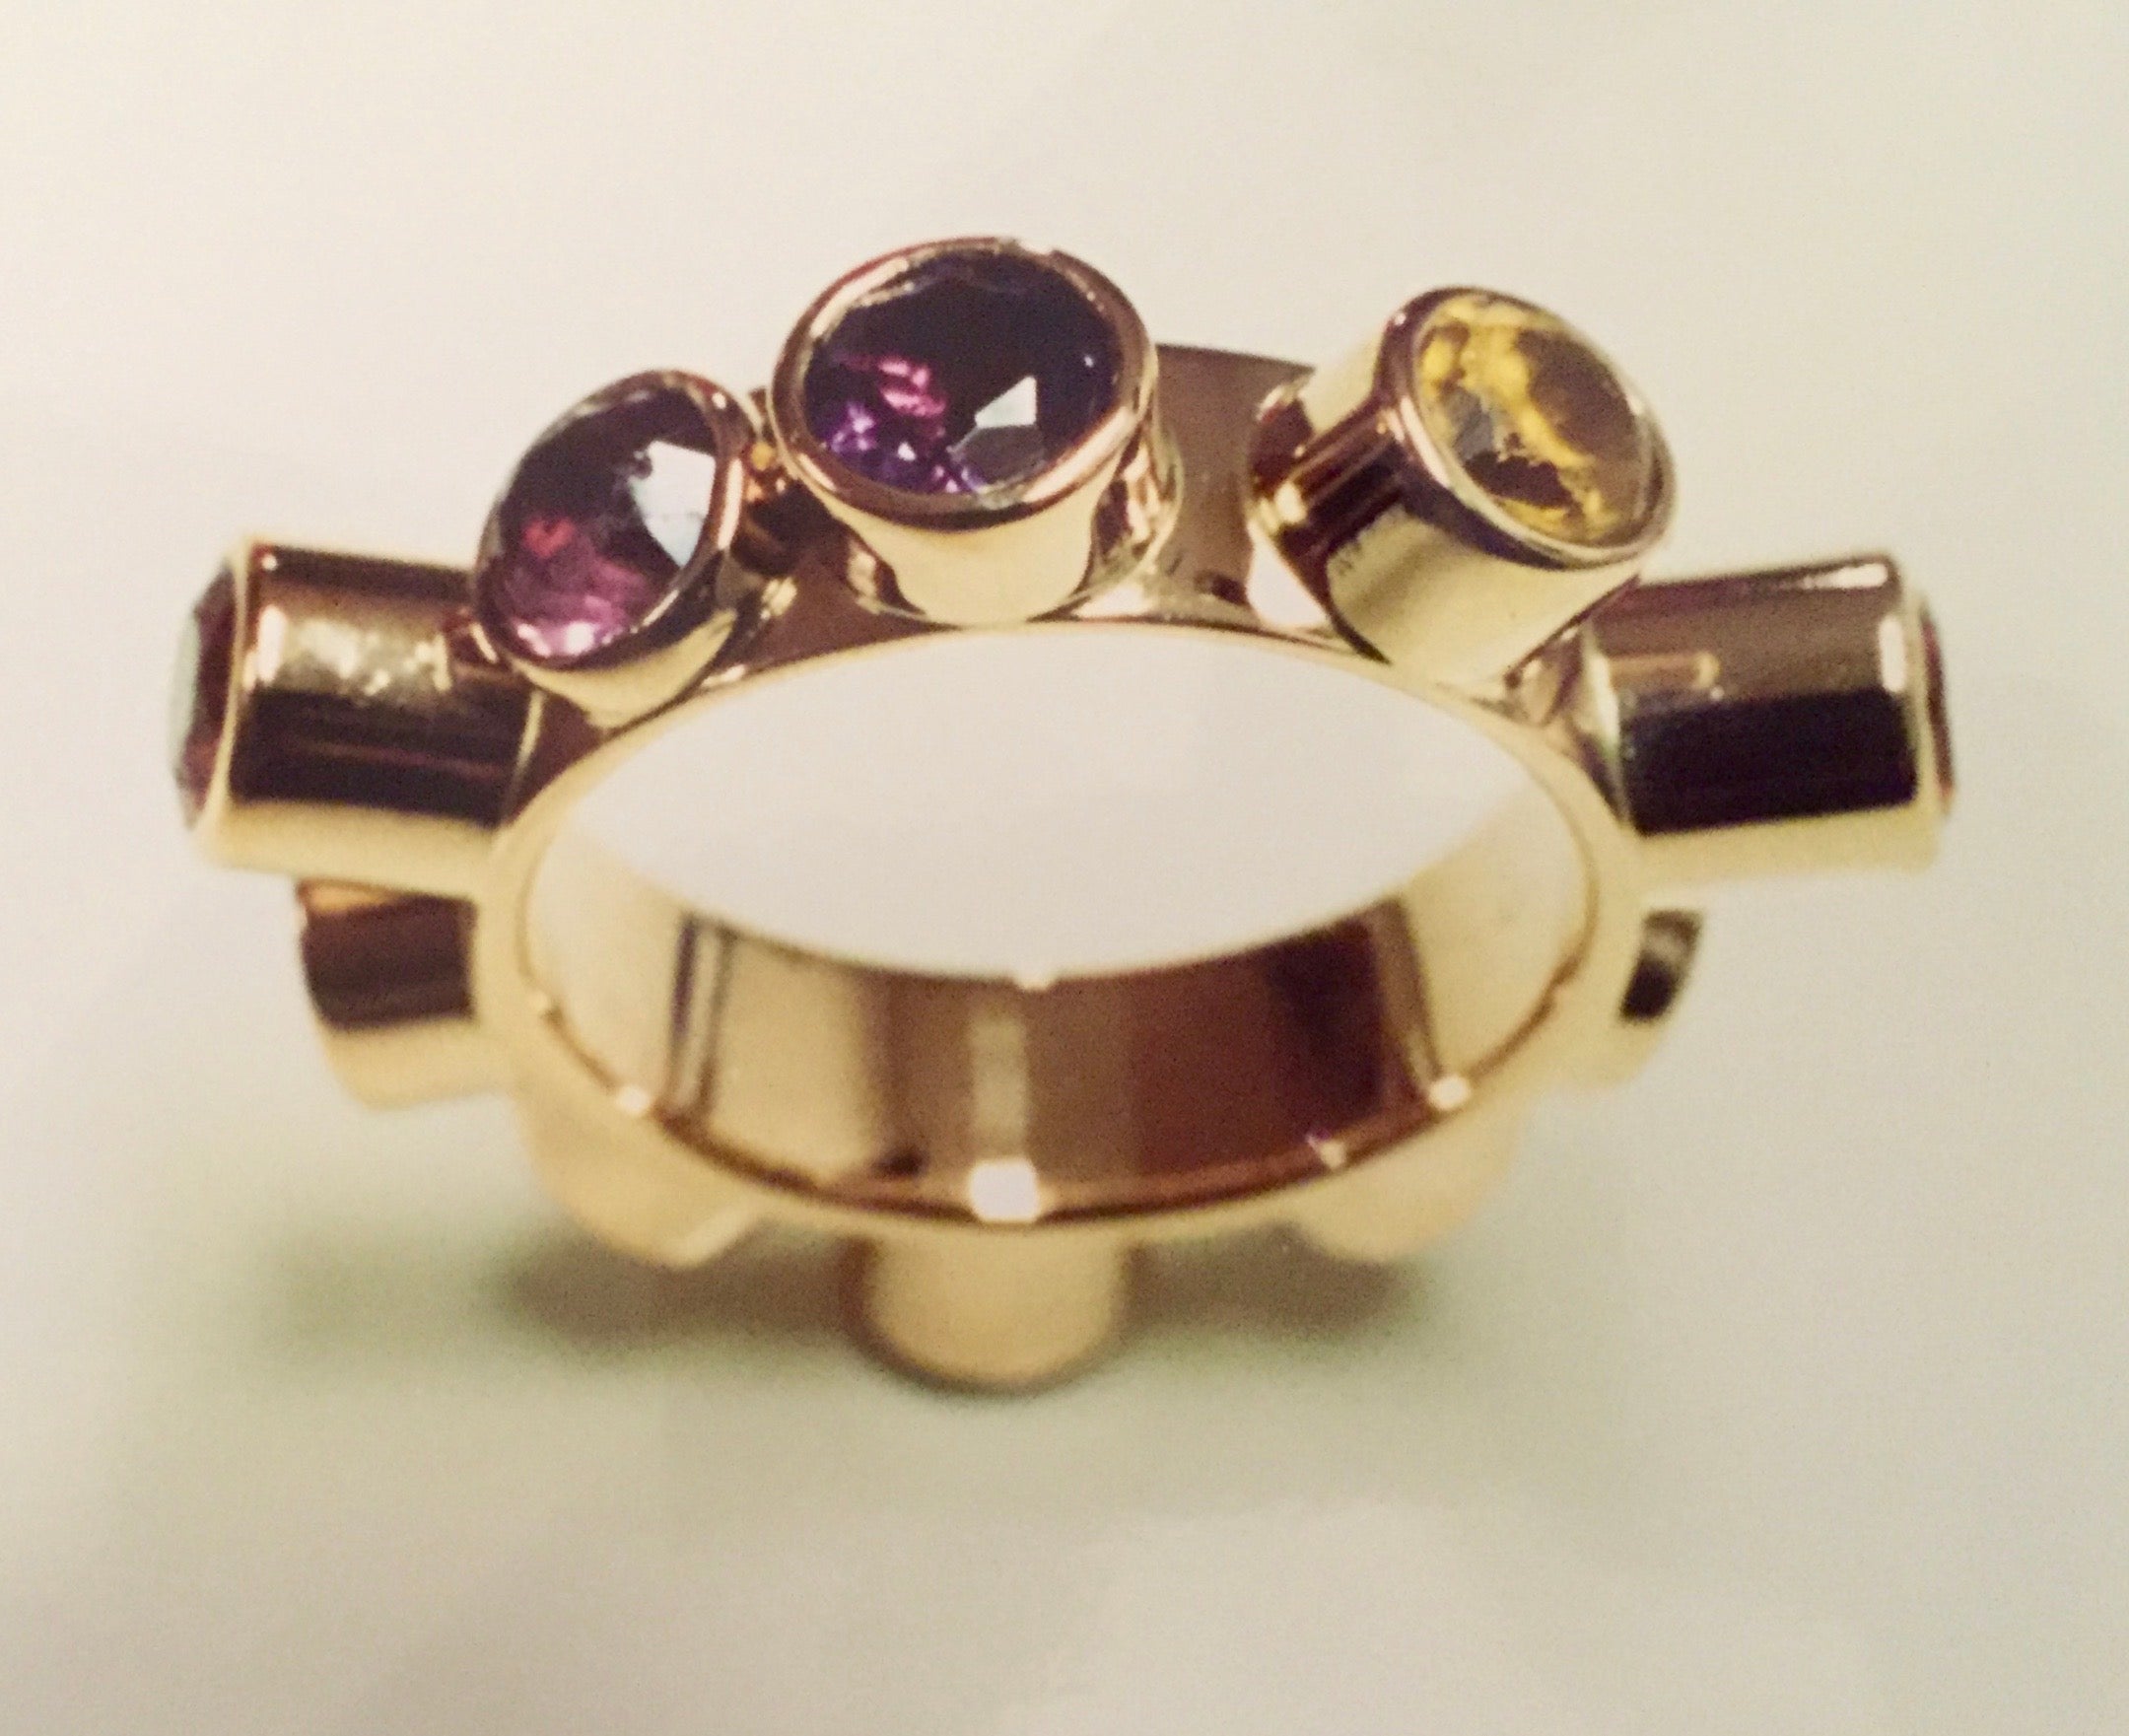 From the Illusions exhibition A one-finger ring with different precious stones all around